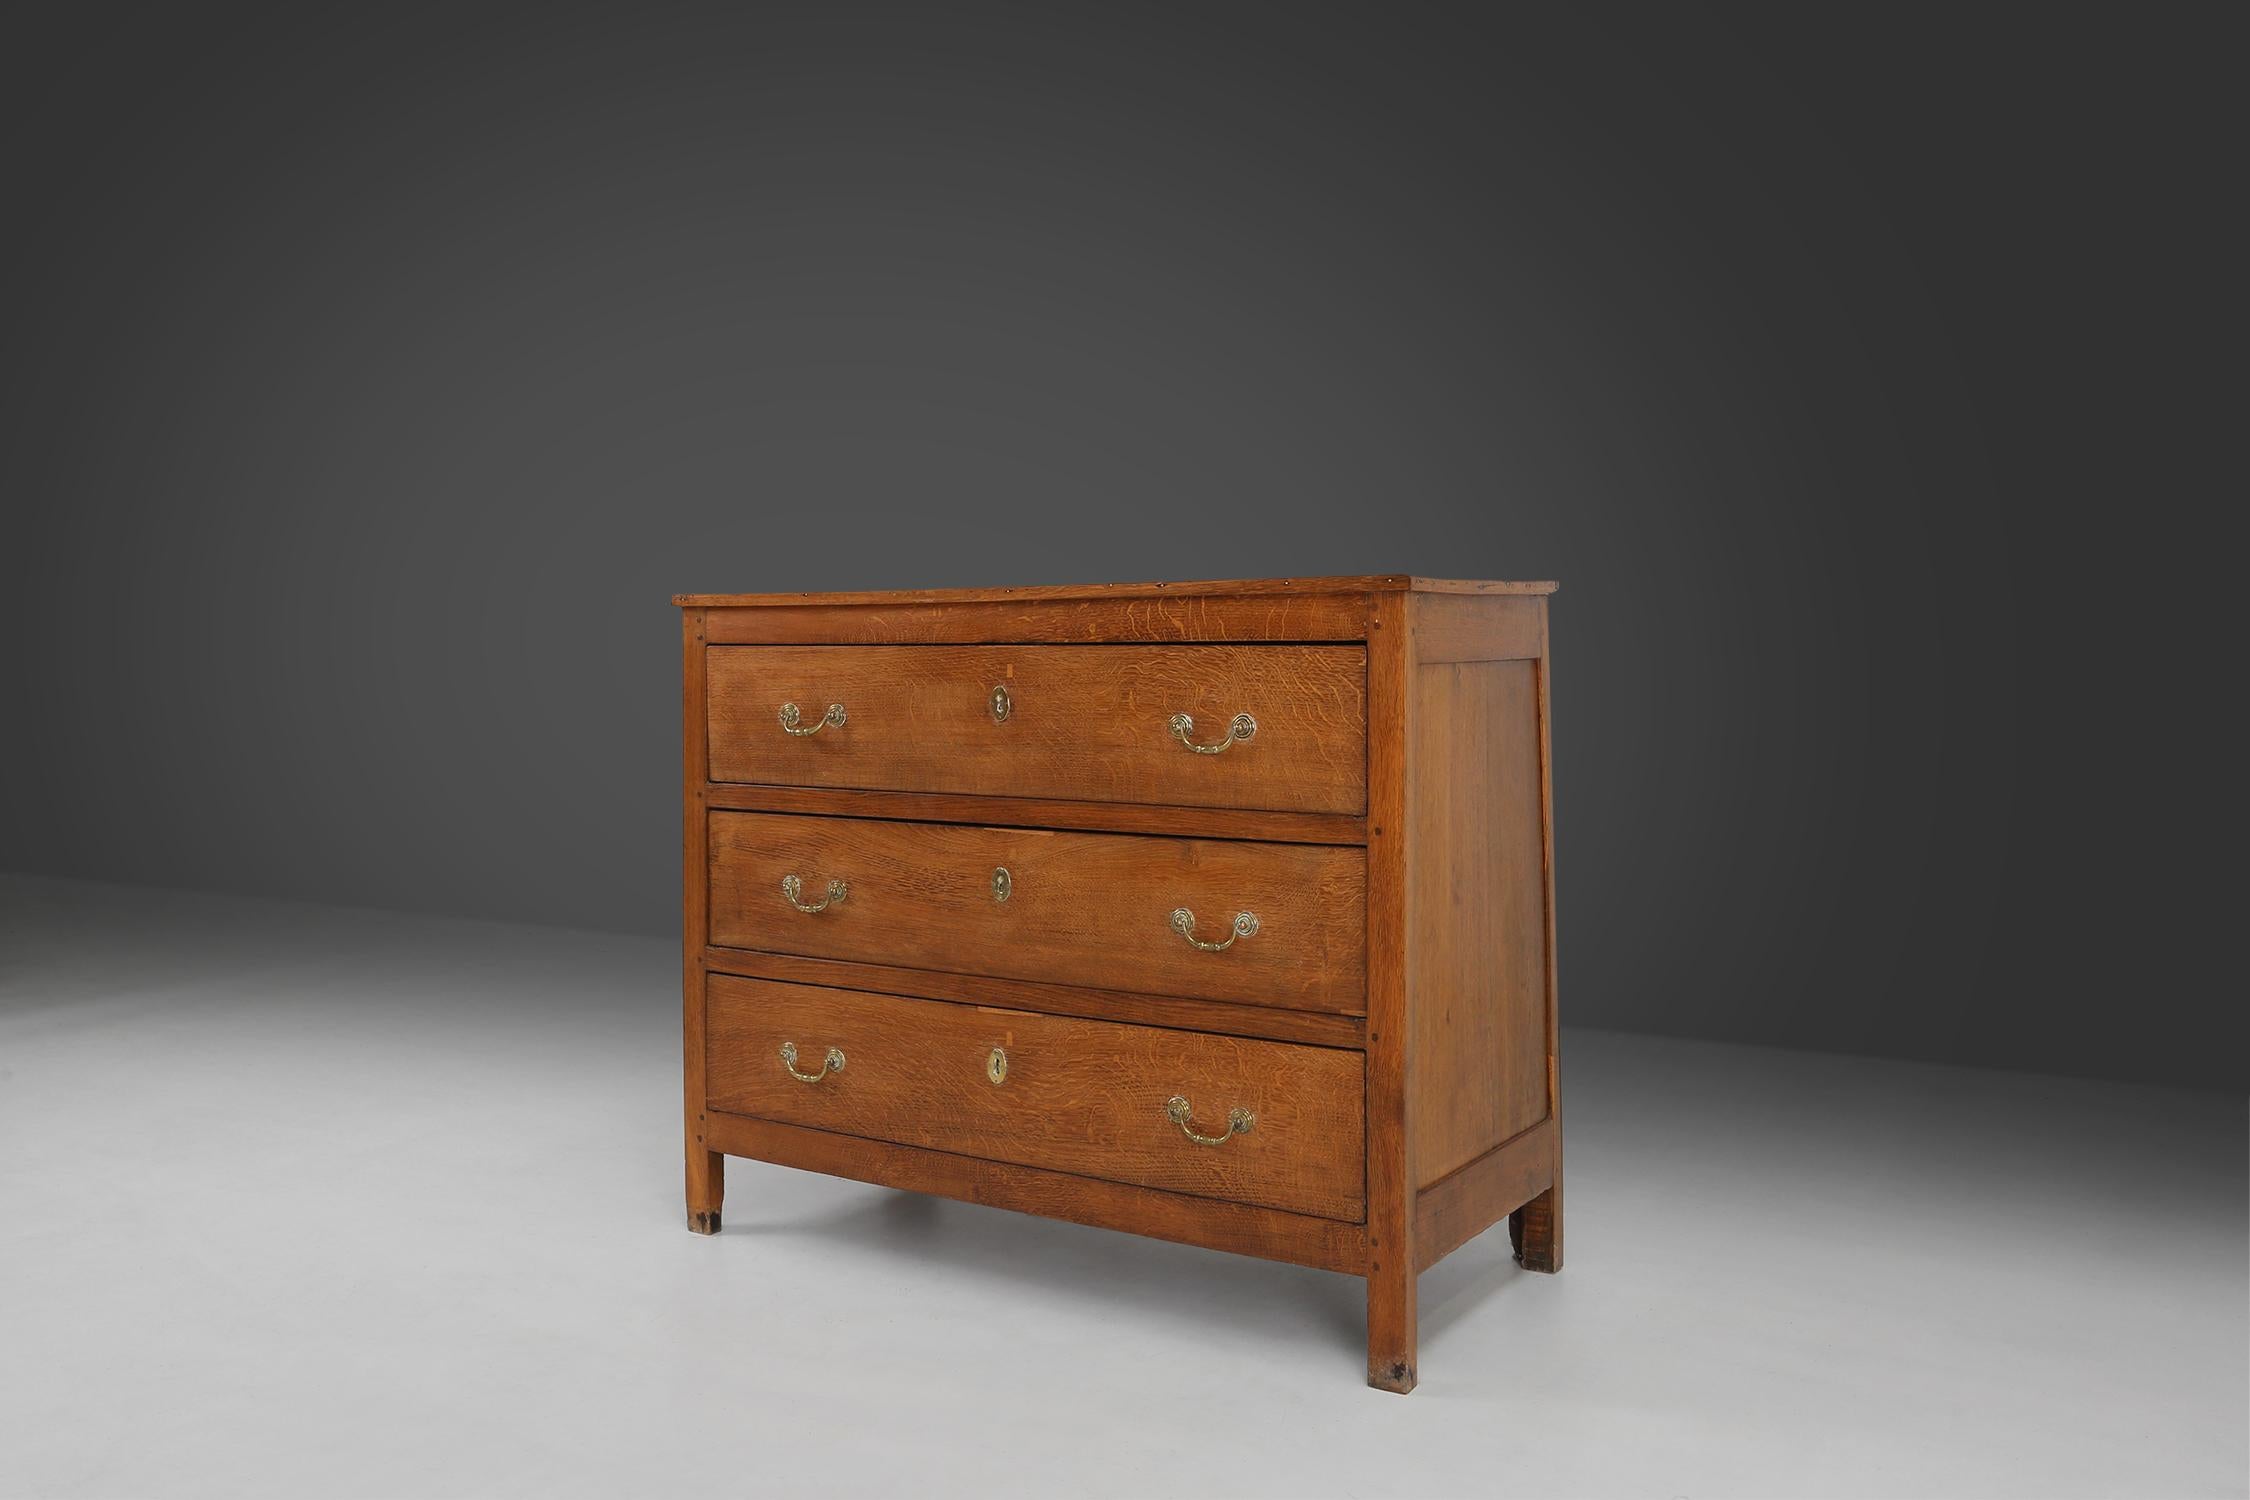 The perfect combination of functionality and style with this beautiful oak chest of drawers, made in France around 1900.

With three spacious drawers, fitted with brass handles, this cabinet has a rustic style to match any interior.

This chest of